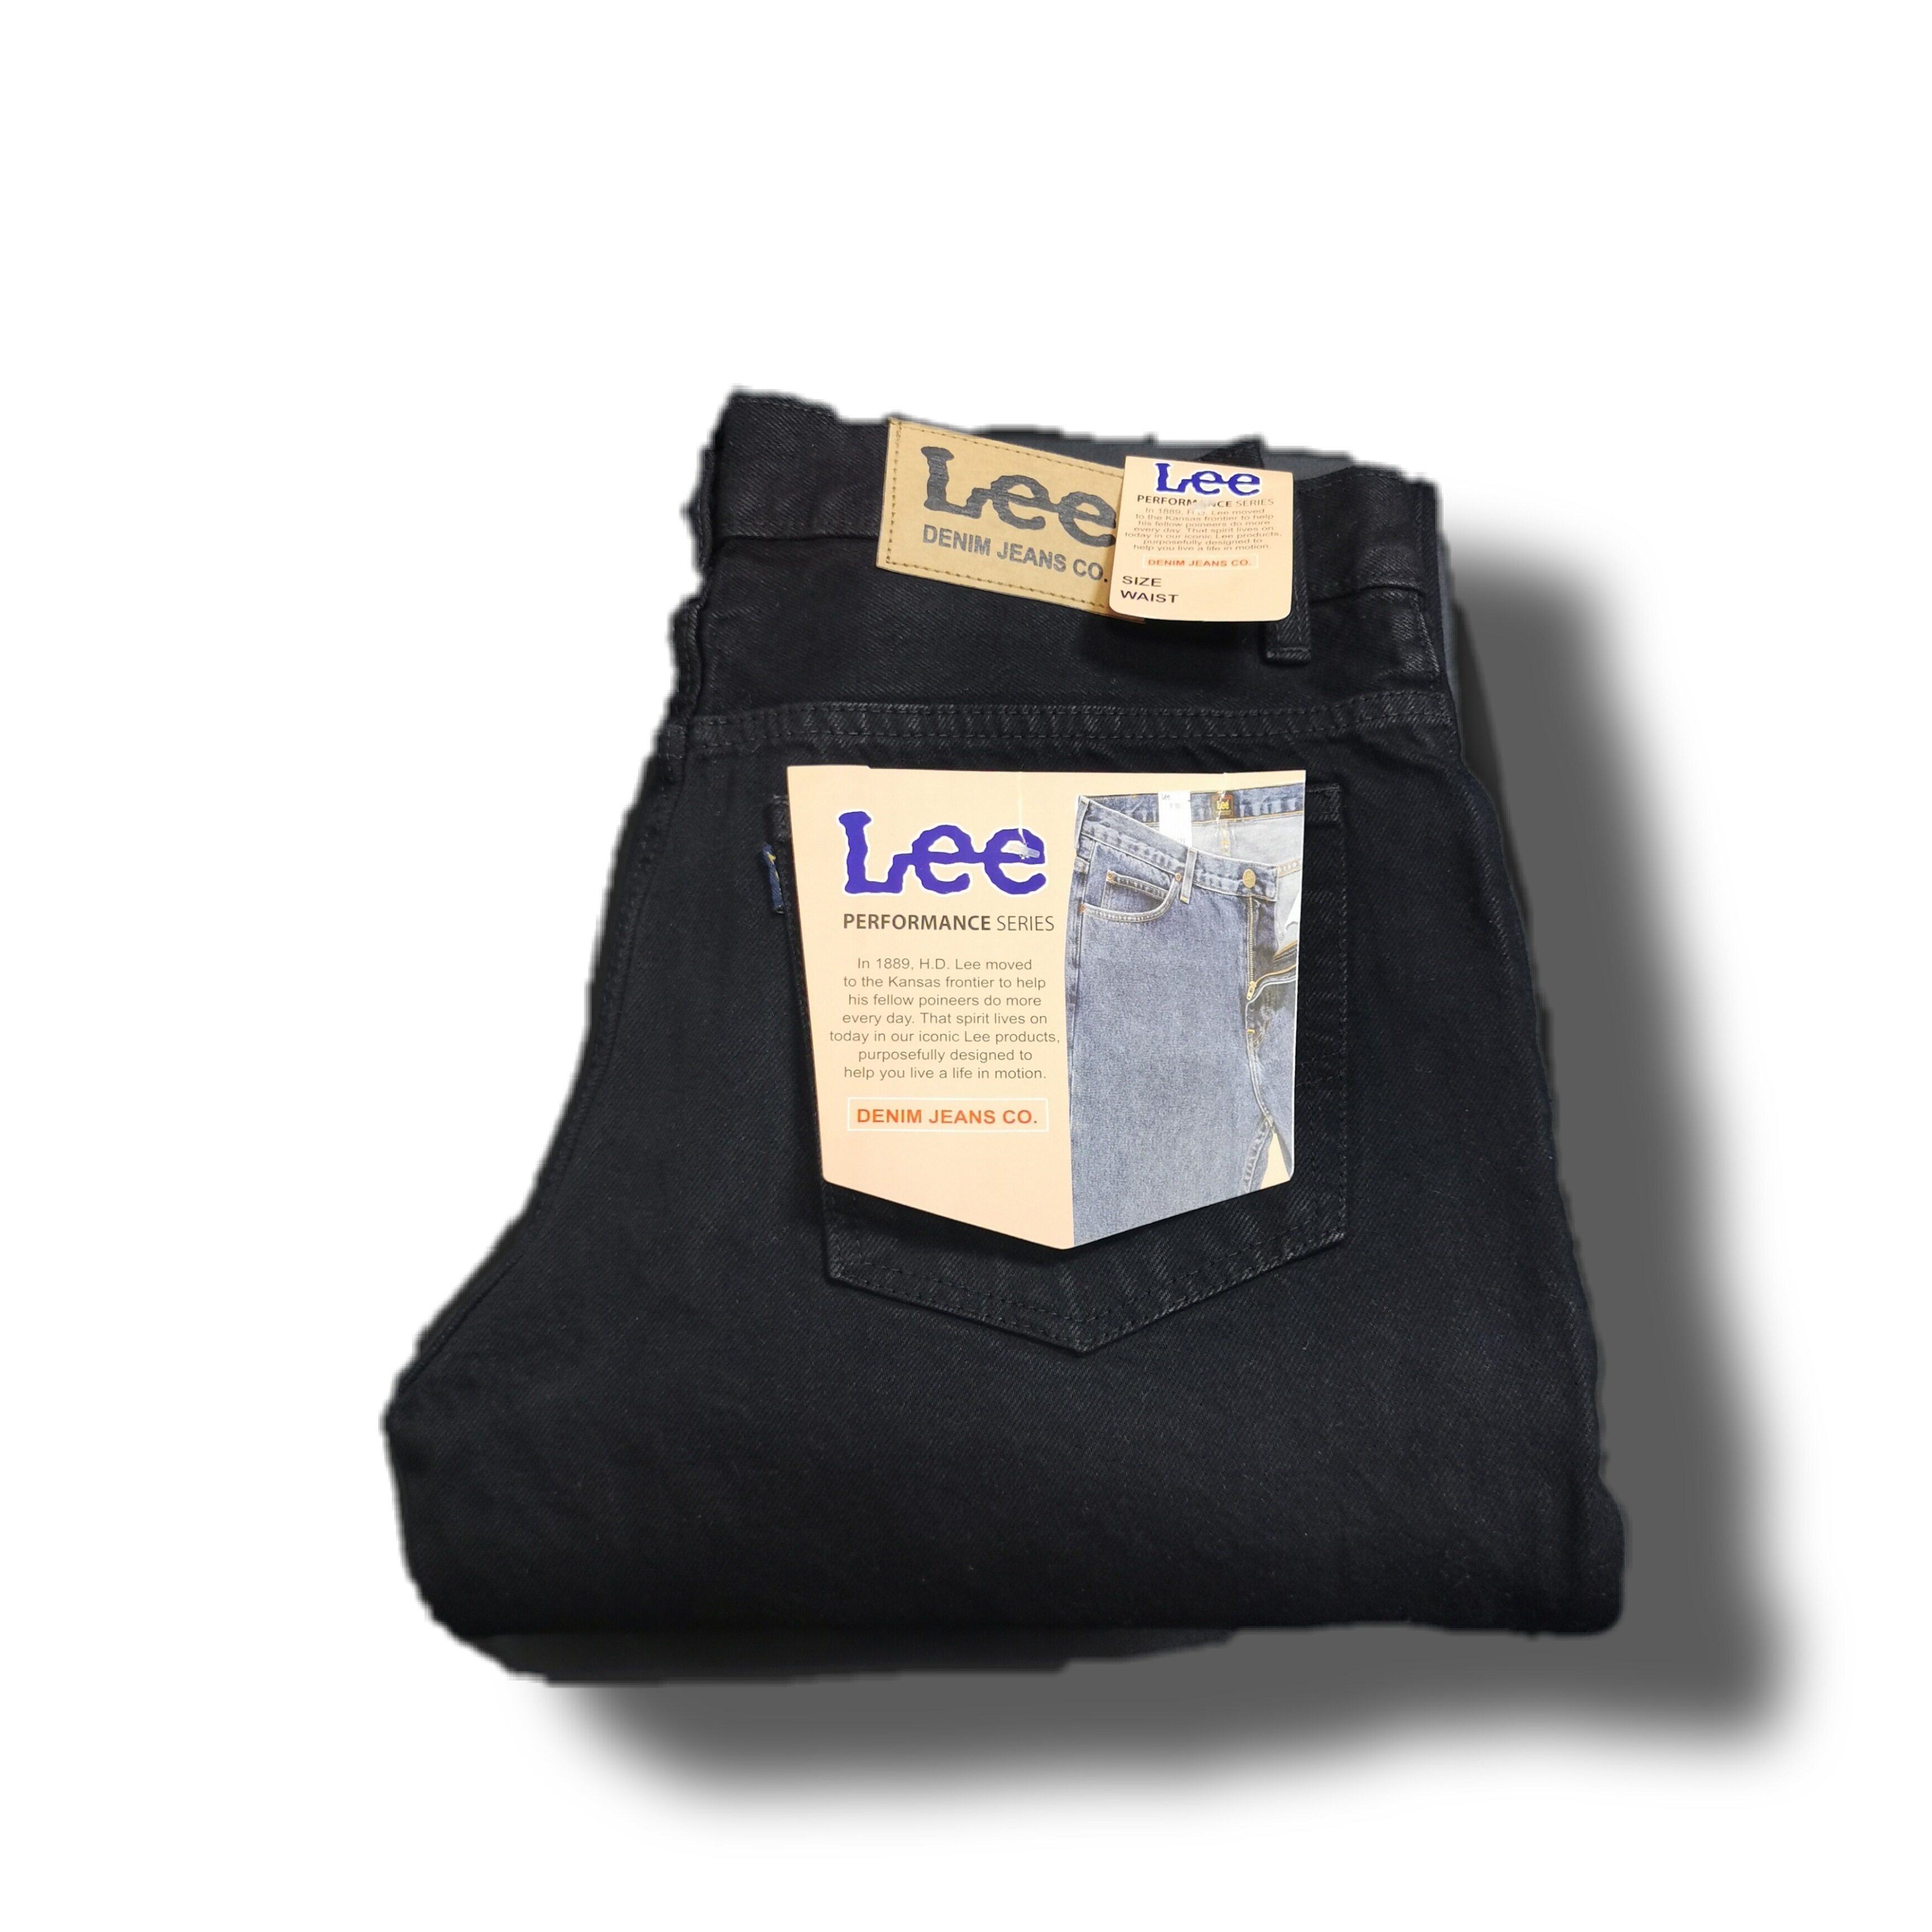 OVERSIZE UP TO SIZE 46 !!!] Lee Men's Relaxed Fit Straight Leg Jeans In  Black Size 30 – 46 [Msia Stock] | Lazada